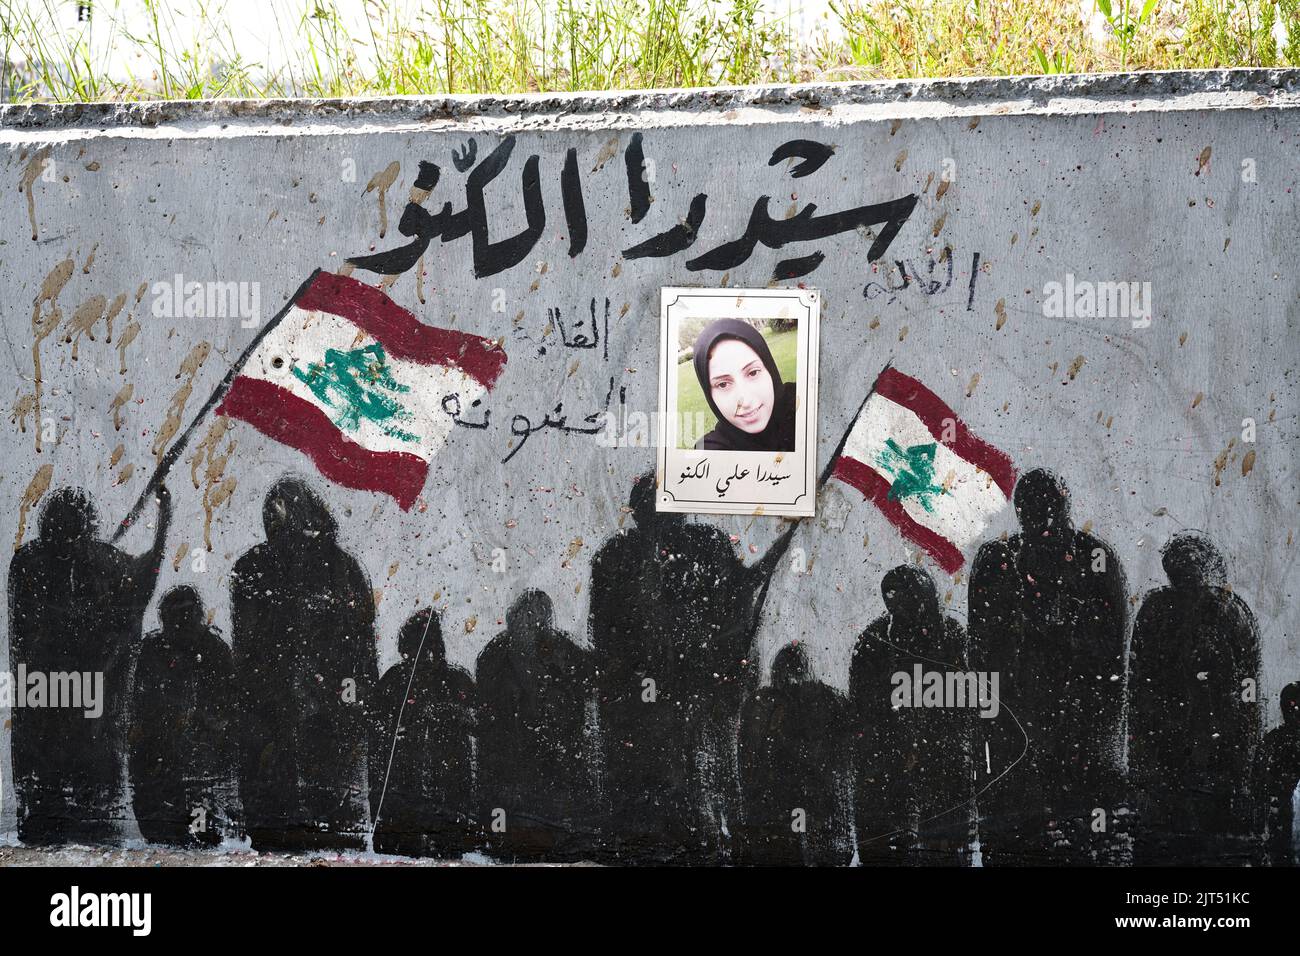 Beirut, Lebanon: Graffiti on the port wall with photos of the victims of the massive explosion of 2,750 tons of ammonium nitrate stored in the city's port that devastated the port and parts of the city on 08/04/2020 Stock Photo